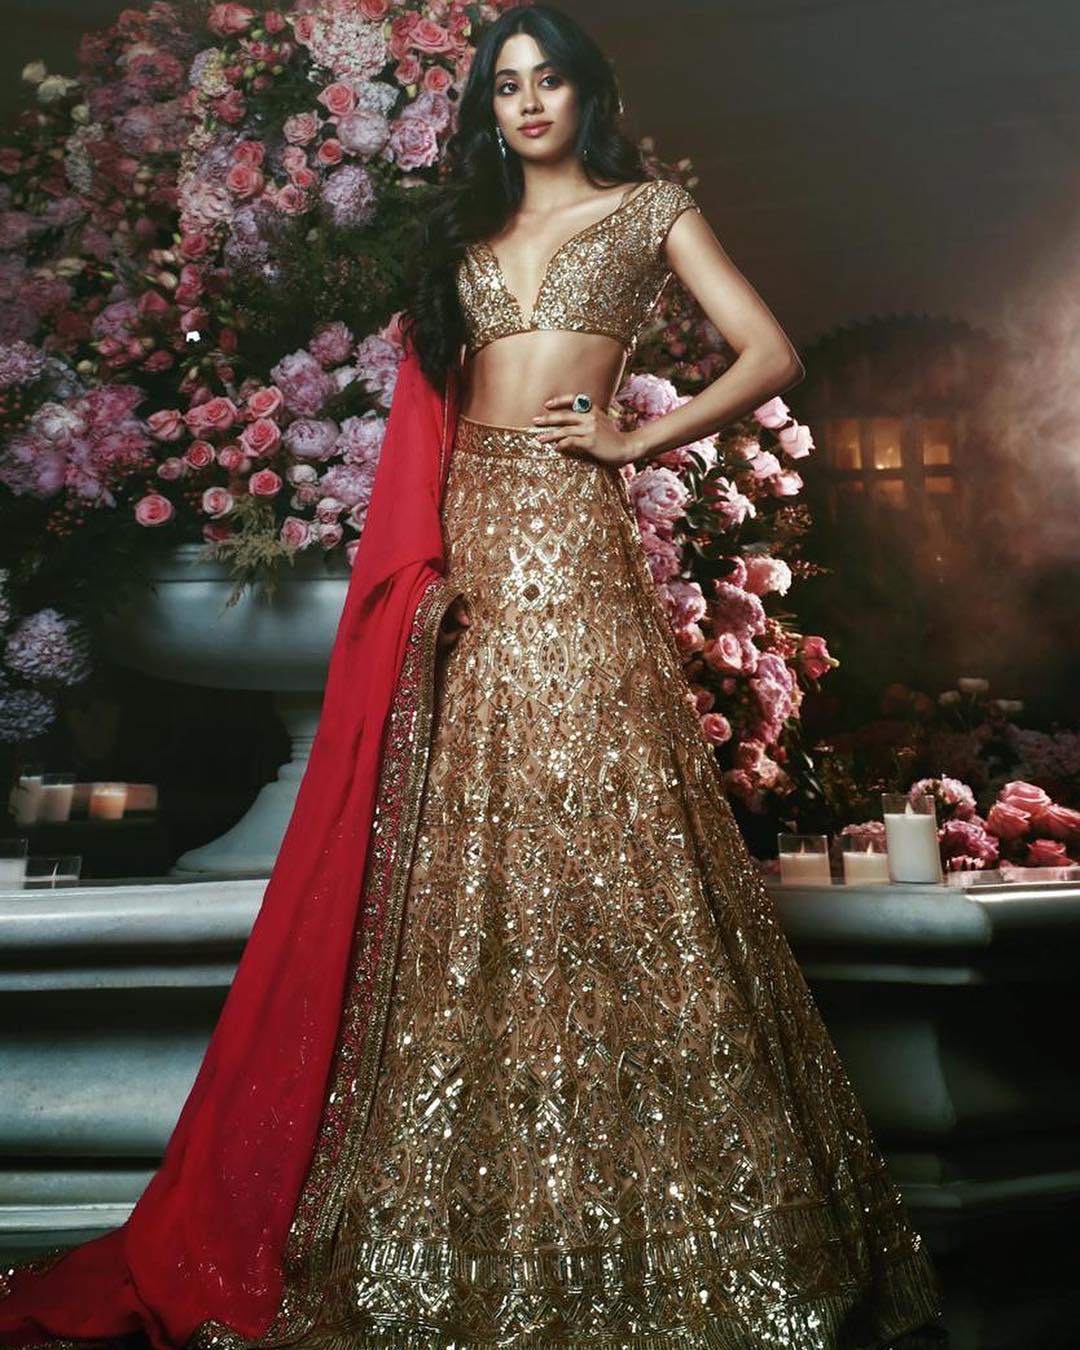 The Hot Janhvi Kapoor In Gold Glittery Lehenga Or Simple Blue Lehenga: In Which Attire Janhvi Had The Hottest Looks? 1